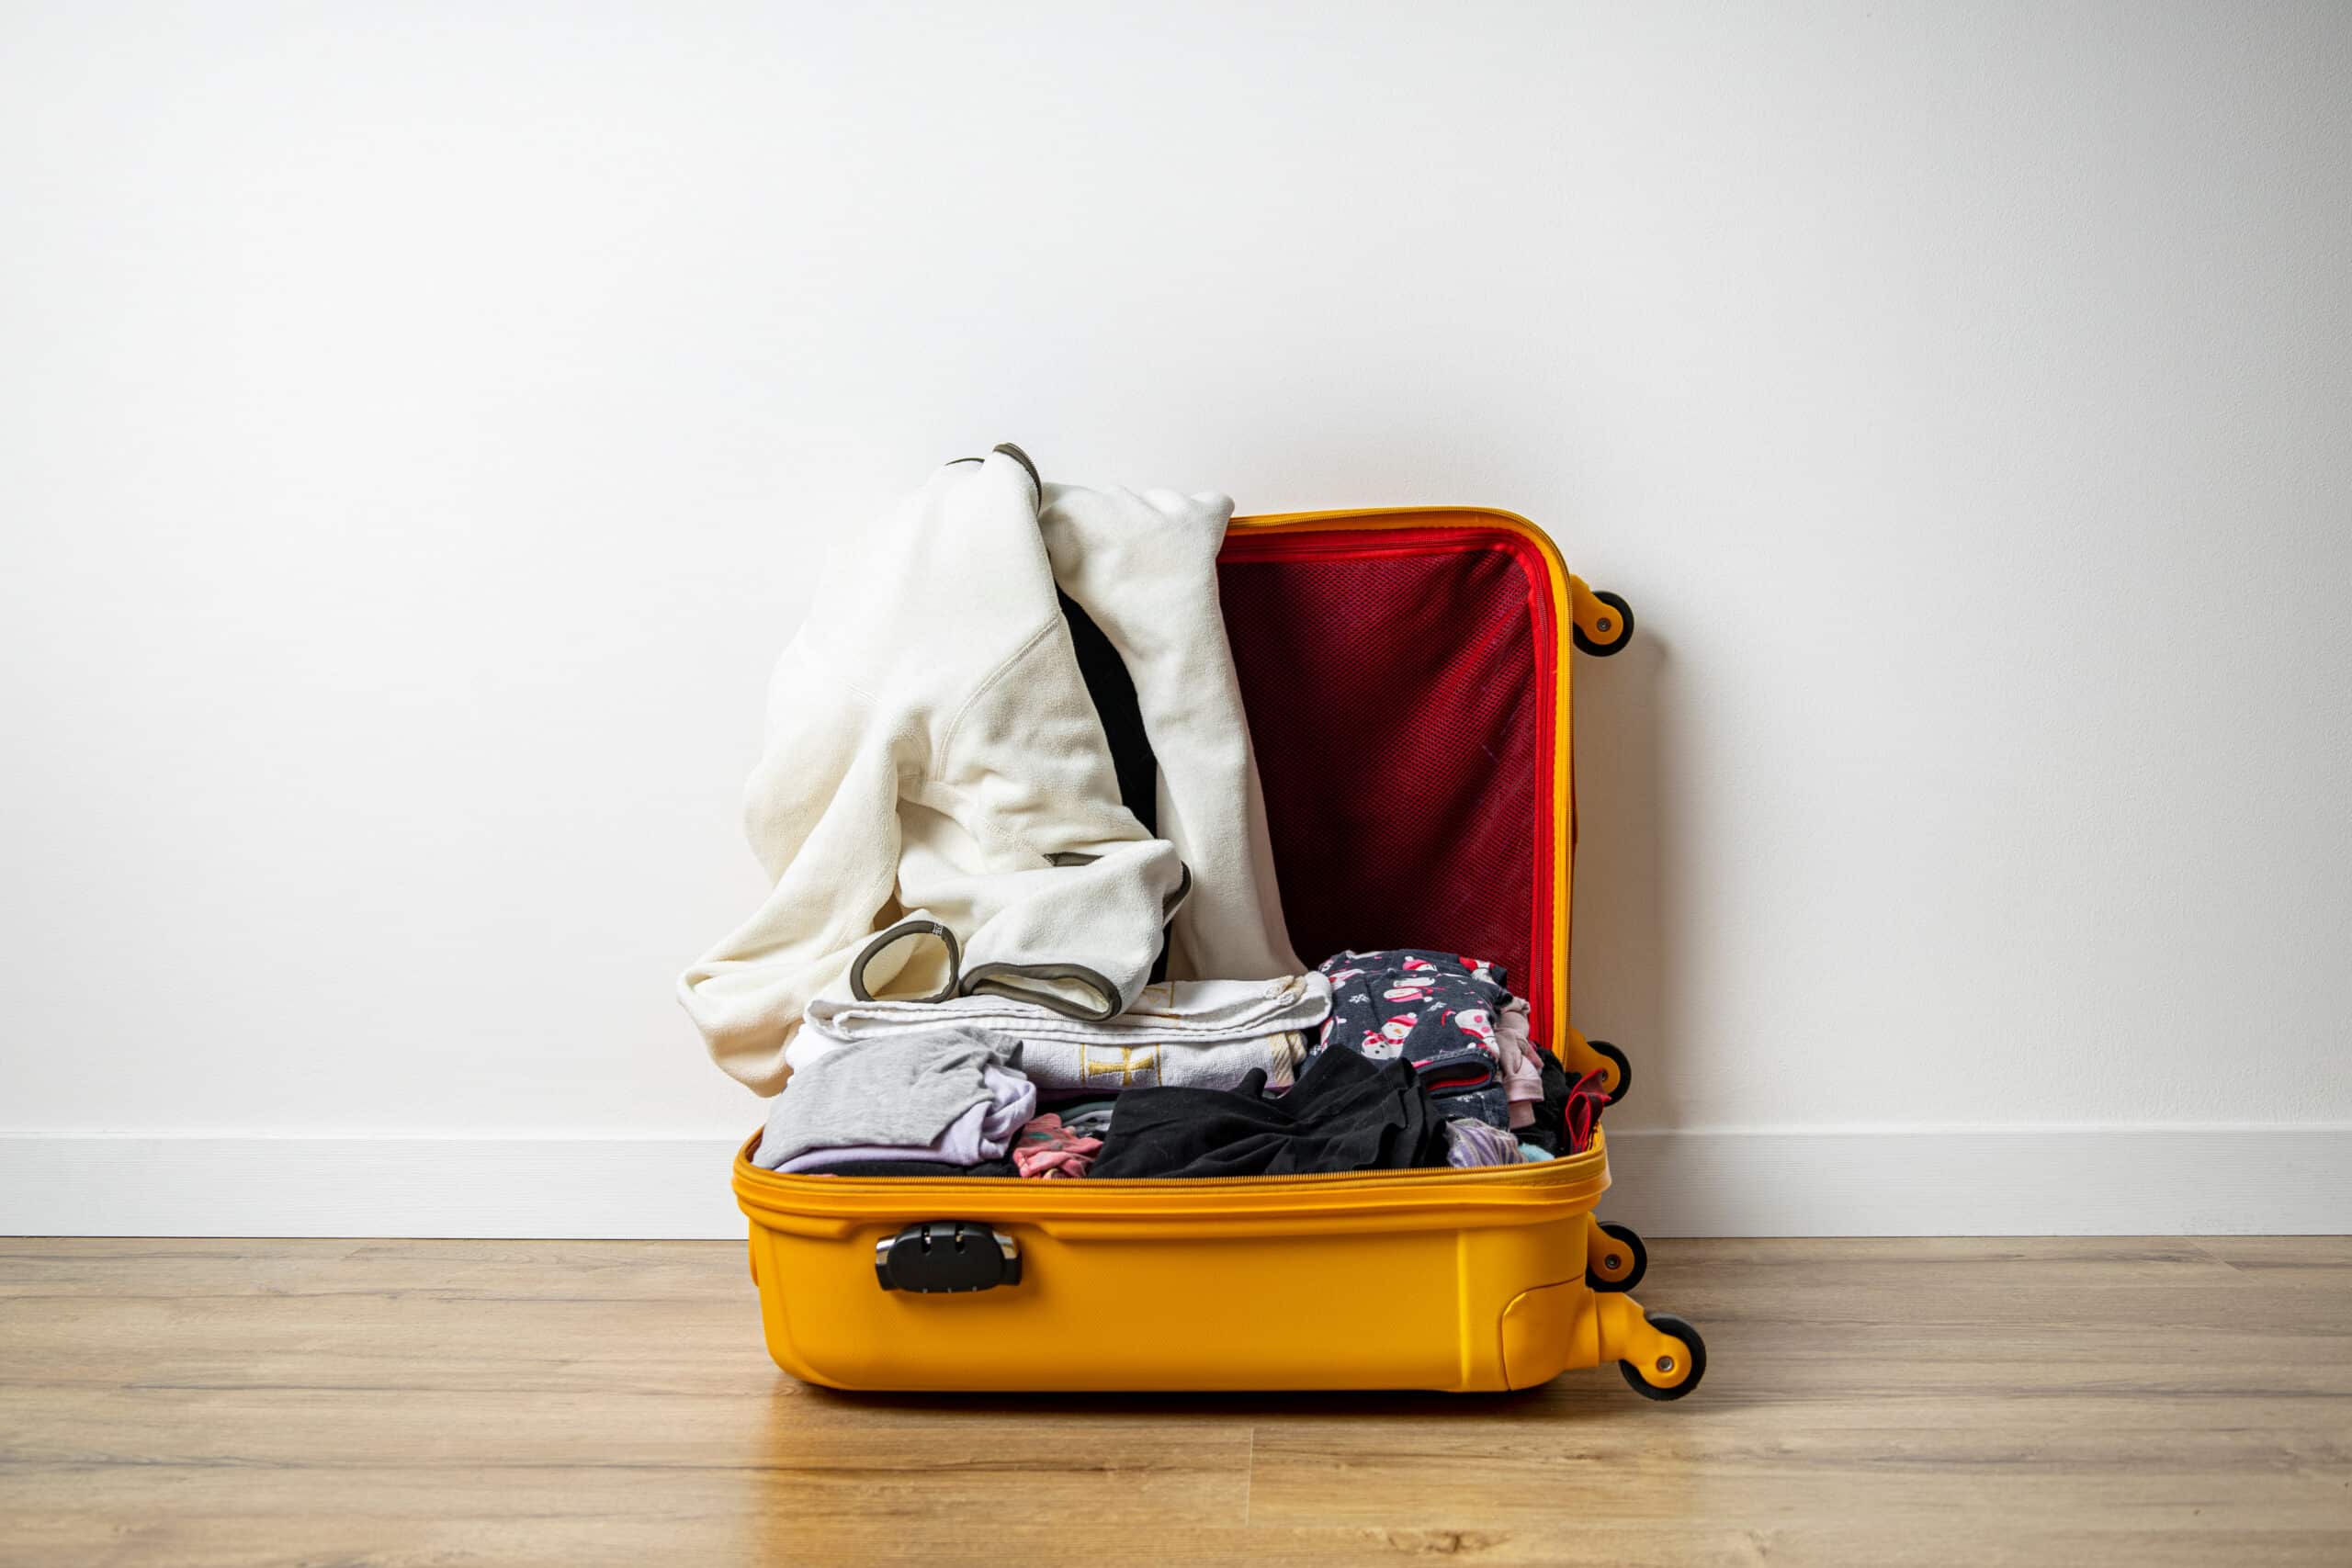 How to Keep Luggage & Clothes Smelling Fresh When Traveling - Open yellow suitcase with clothes on a wooden floor against a white wall